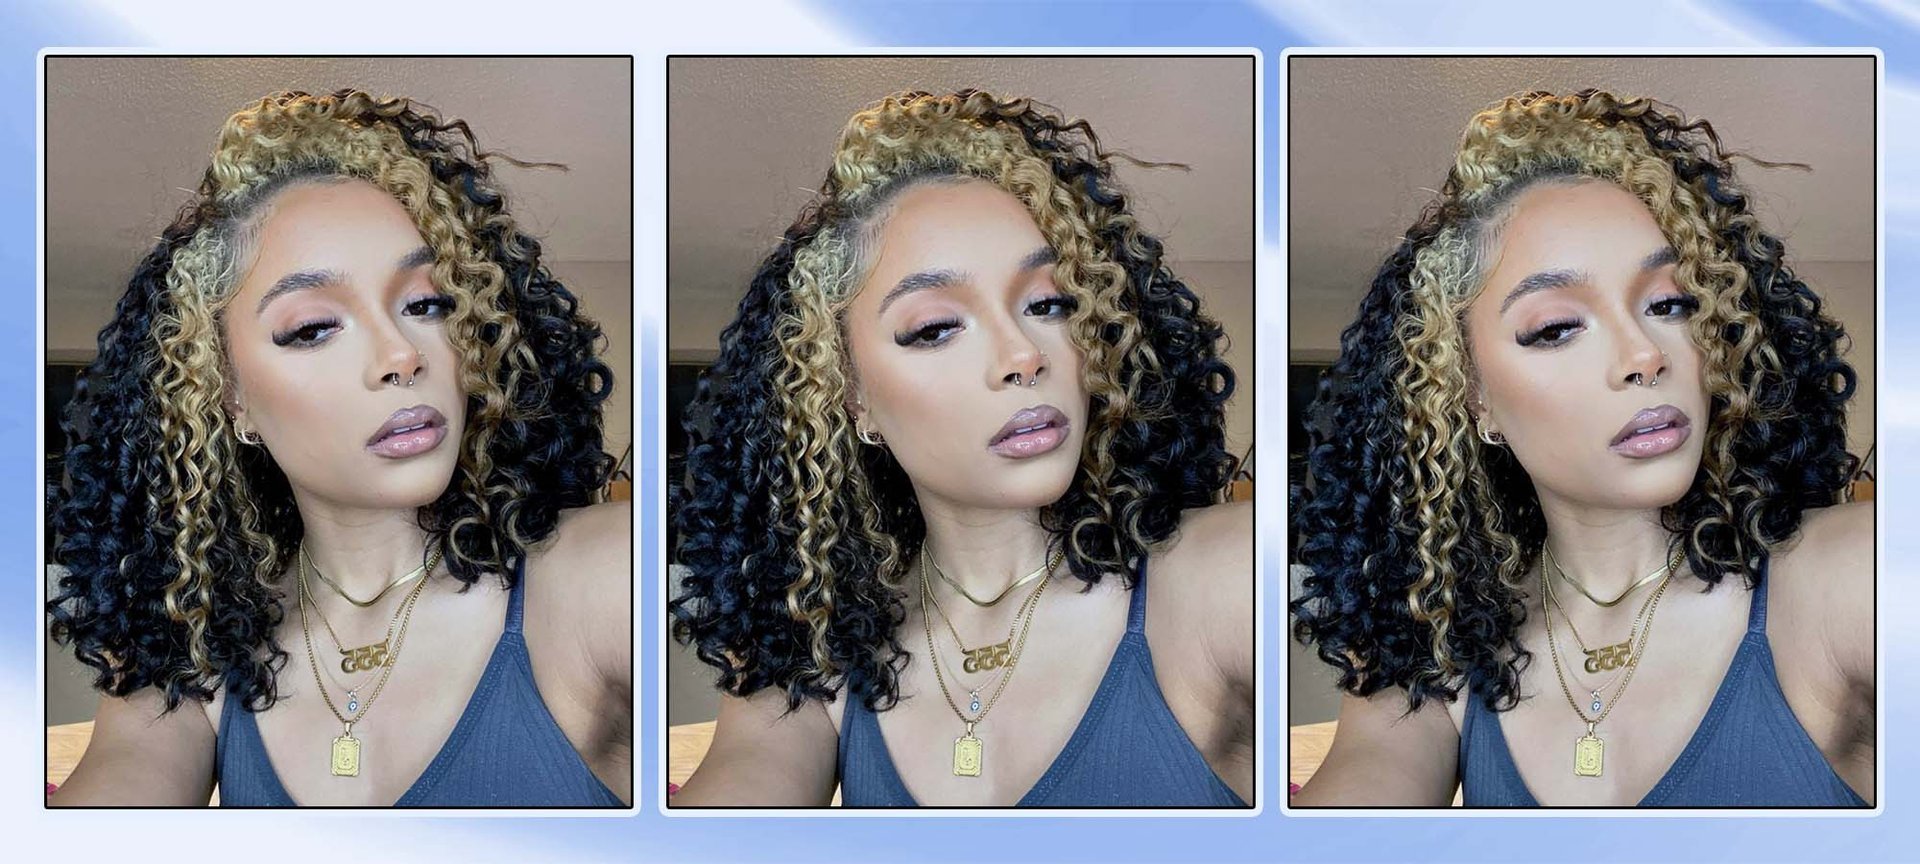 Money Pieces Are the Hyper-Trendy Highlights Anyone With Any Hair Color  Can Do — See Photos